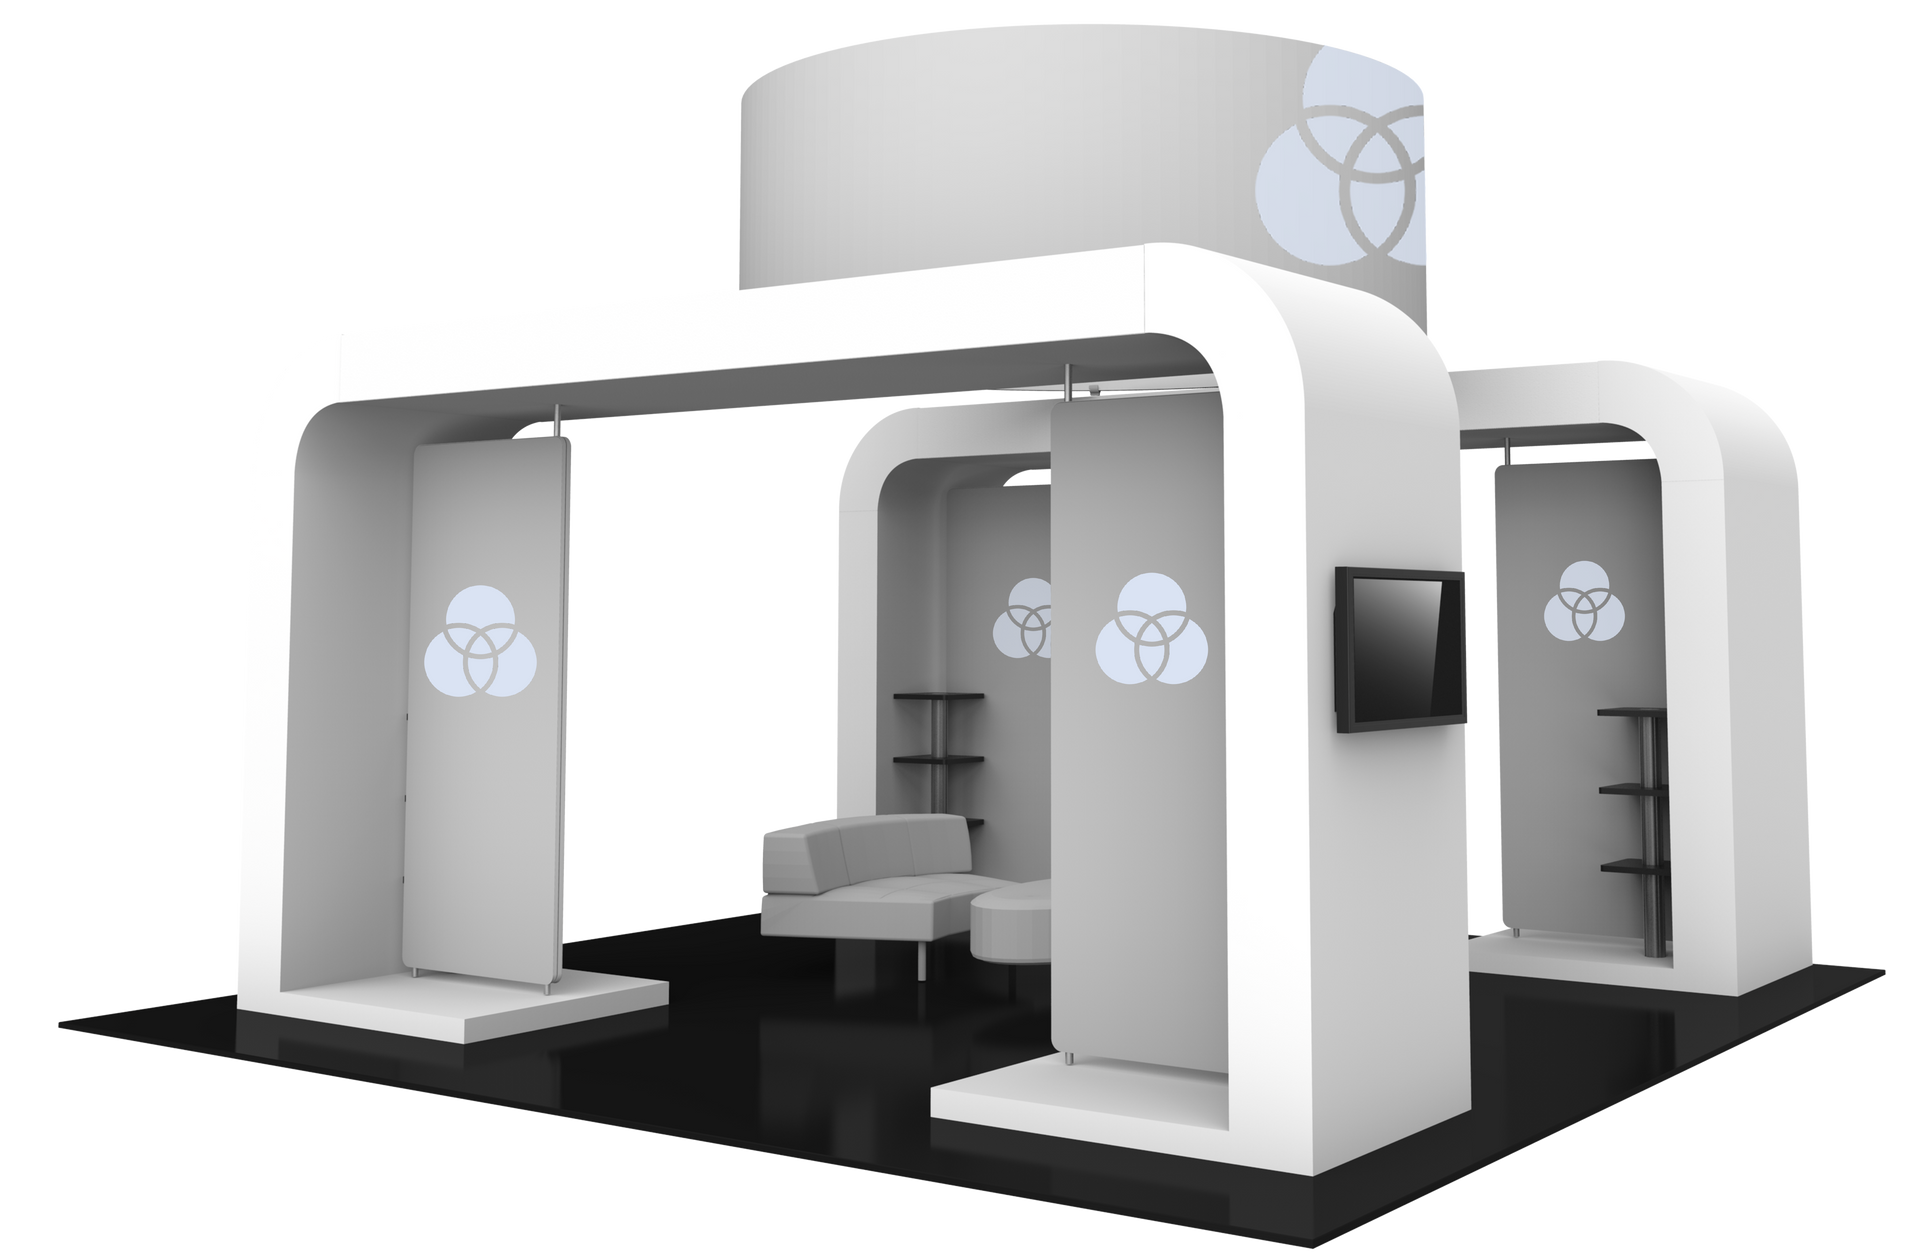 20x20 Trade Show Booth for Sale